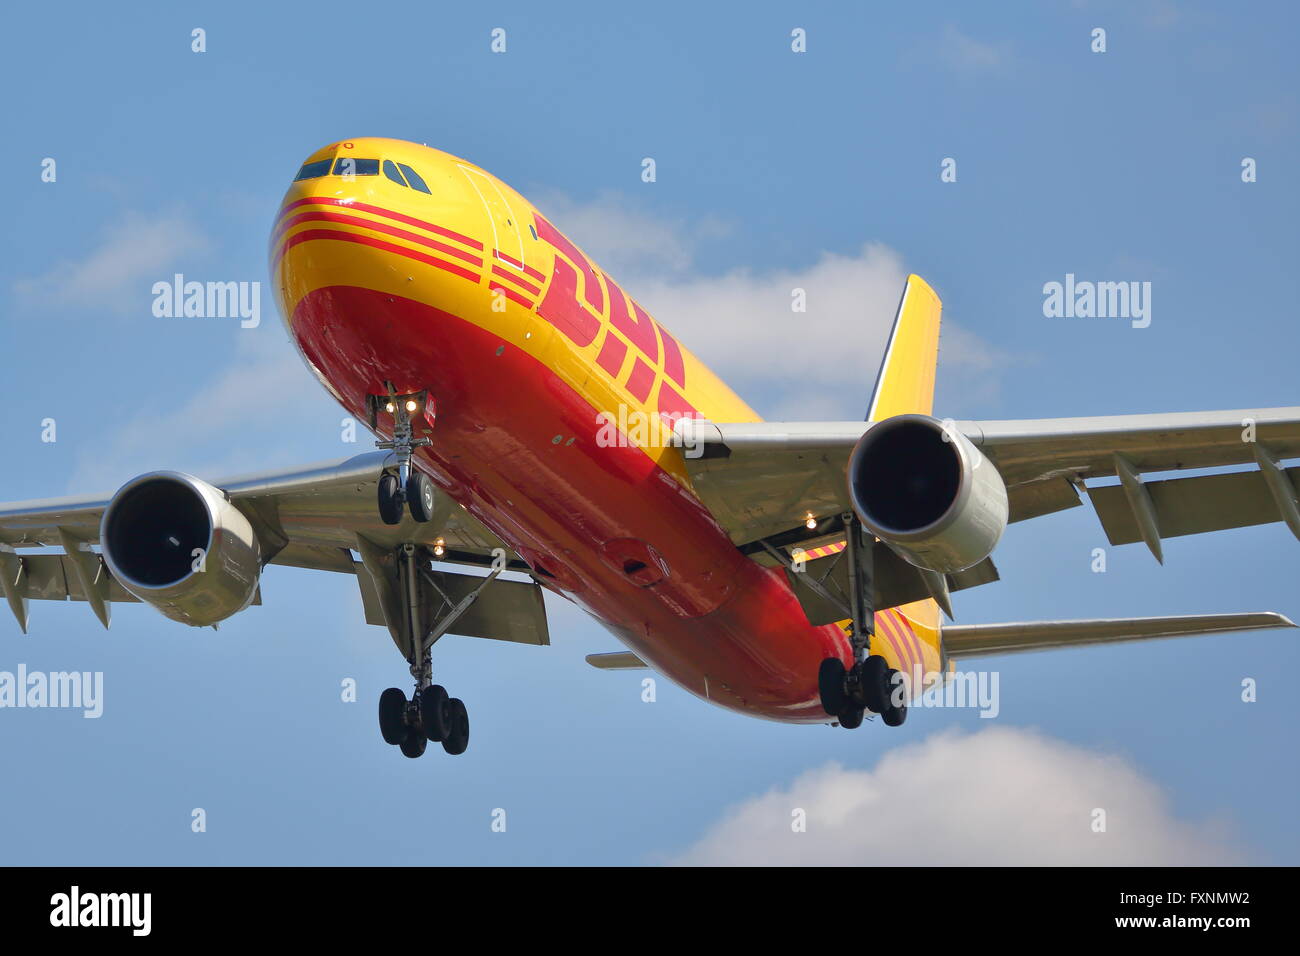 EAT DHL Airbus A300-622RF D-AEAO arriving at London Heathrow Airport, UK Stock Photo